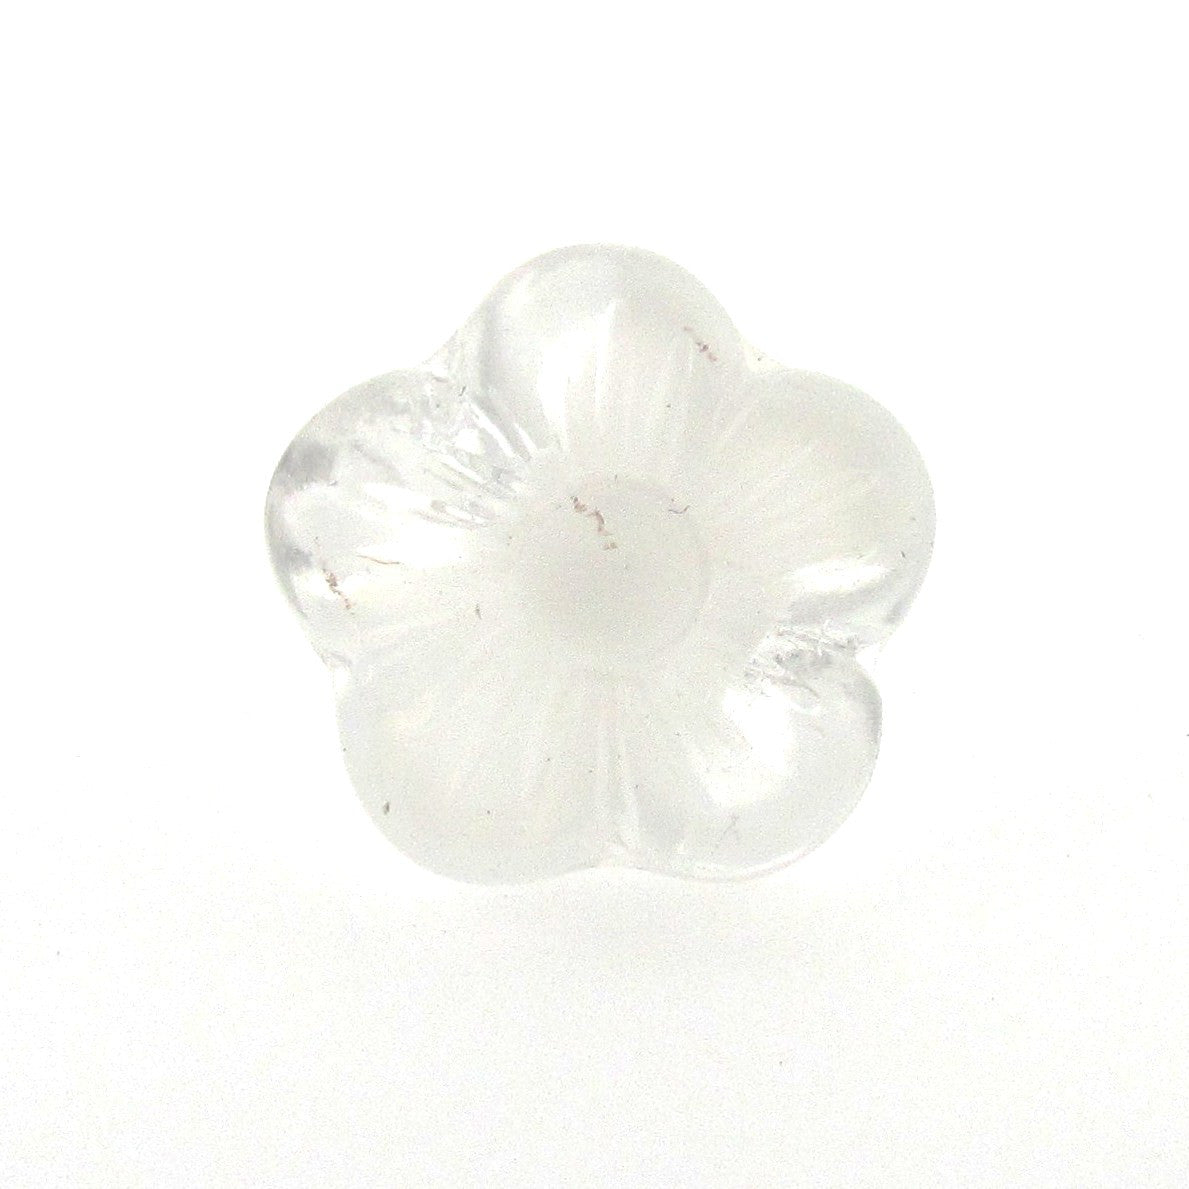 White Givre Glass Flower Bead (36 pieces)